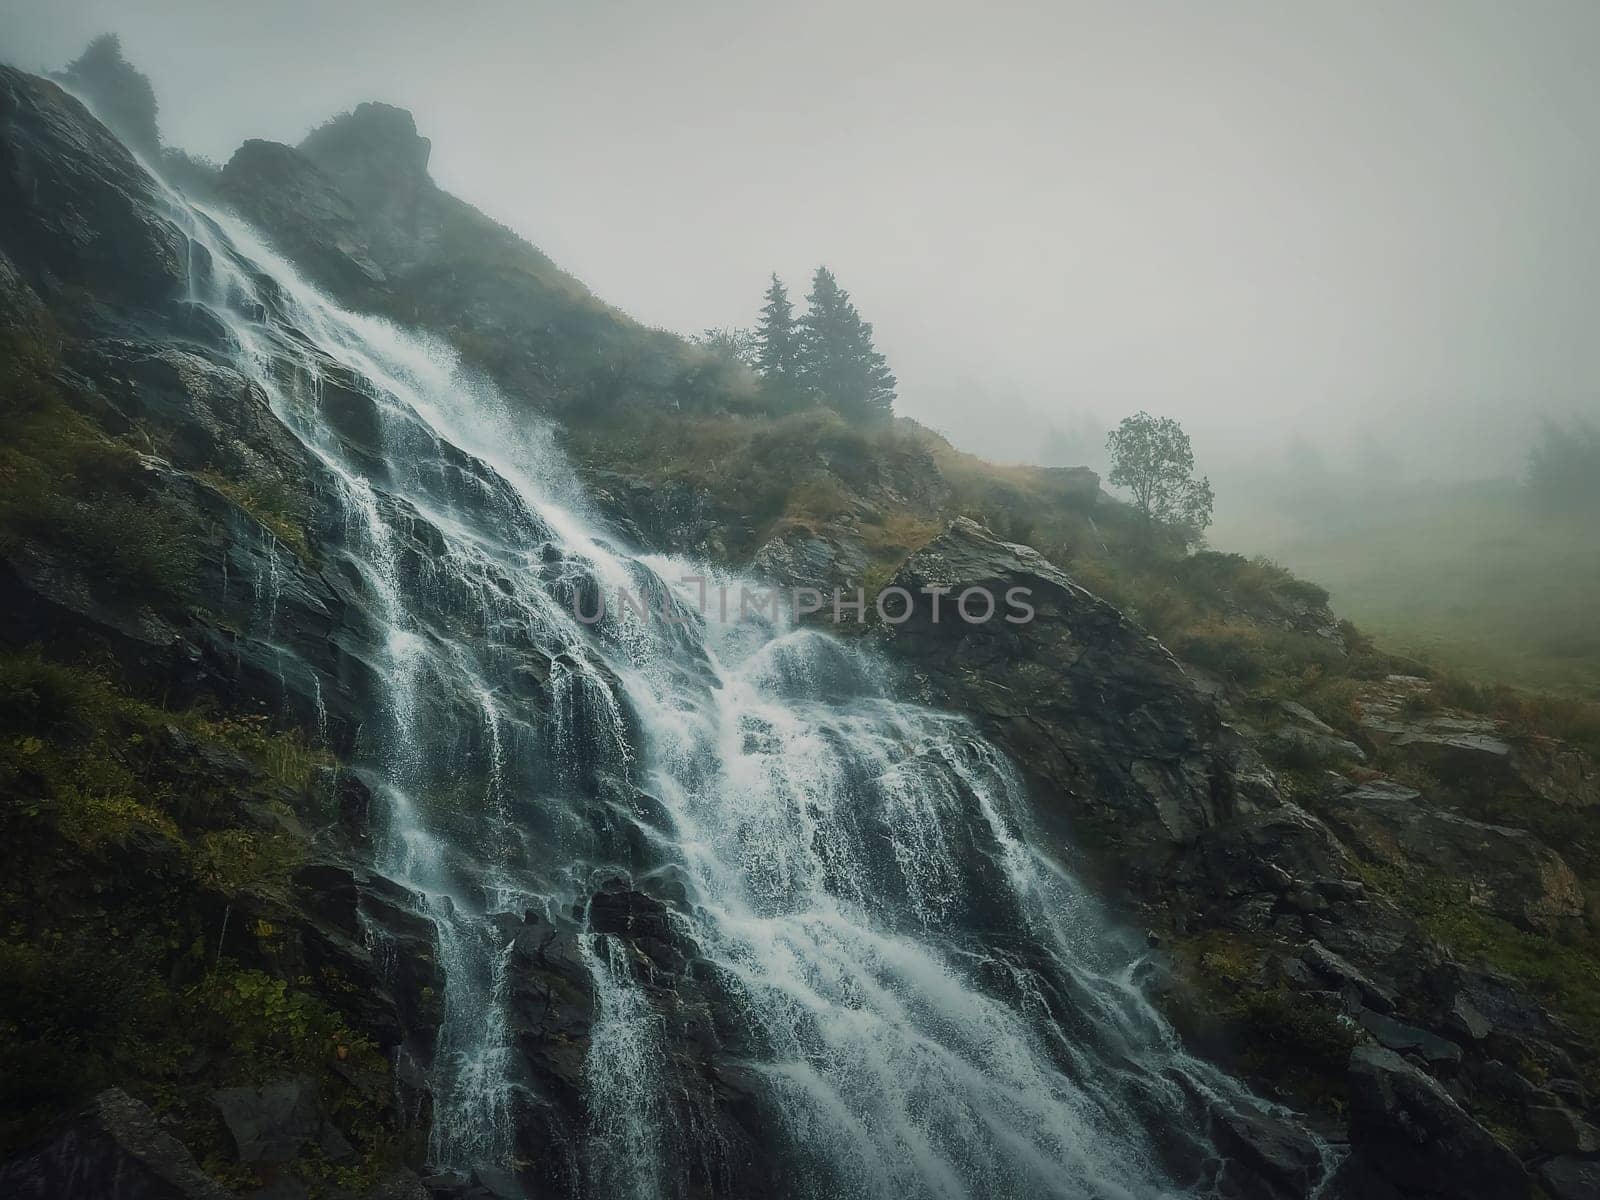 Capra waterfall on the Transfagarasan route in romanian Carpathians. Idyllic scene with a big river flowing down through the rocks in a misty autumn morning by psychoshadow